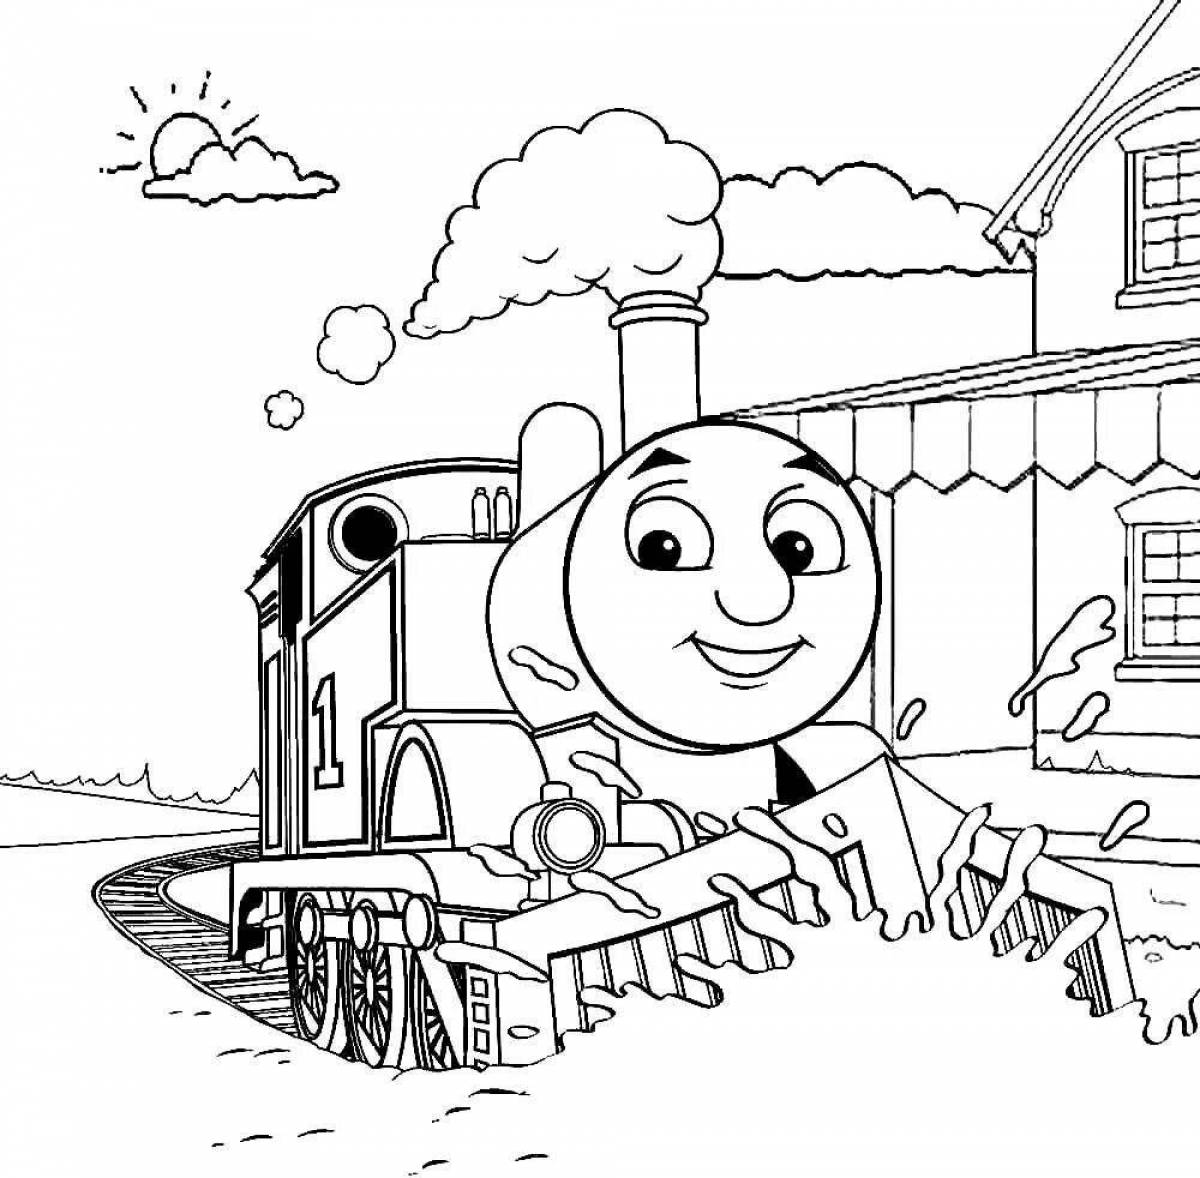 Exquisite thomas the tank engine coloring book for kids